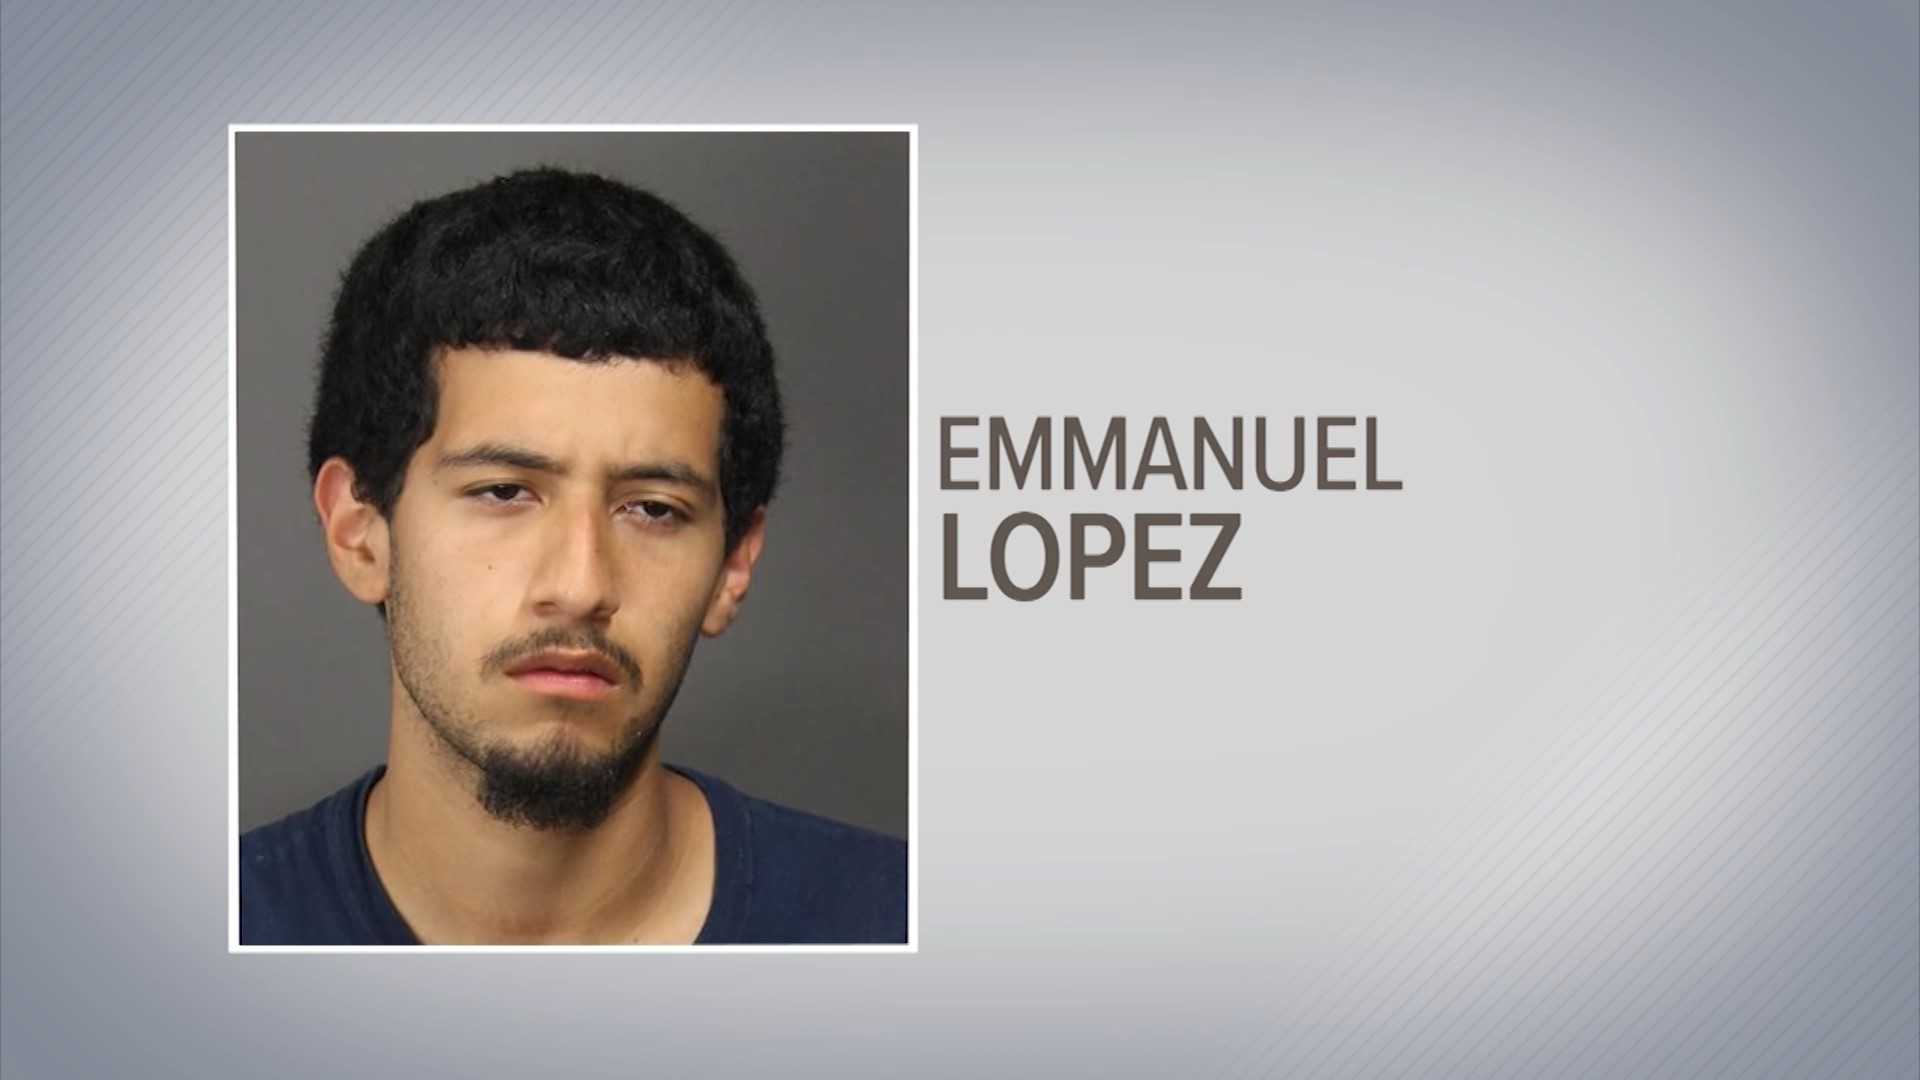 Emmanuel Lopez was released from jail on a $100 bond and charged with a misdemeanor.